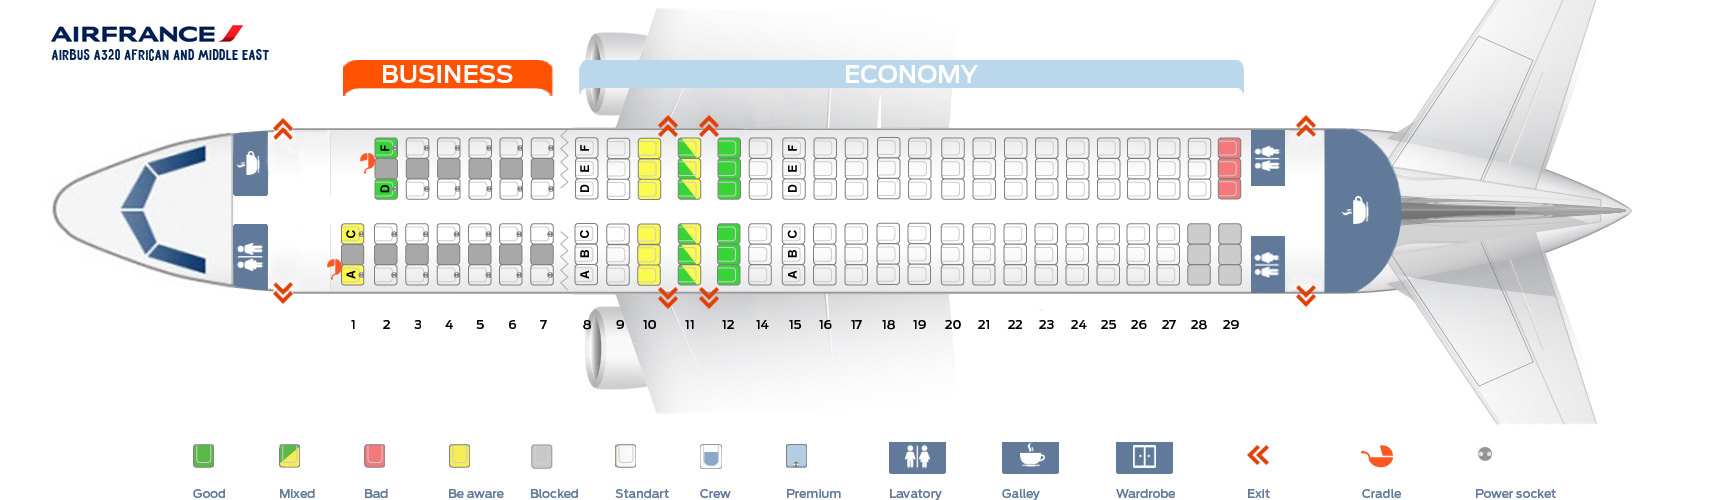 Seat map Airbus A320200 Air France. Best seats in plane